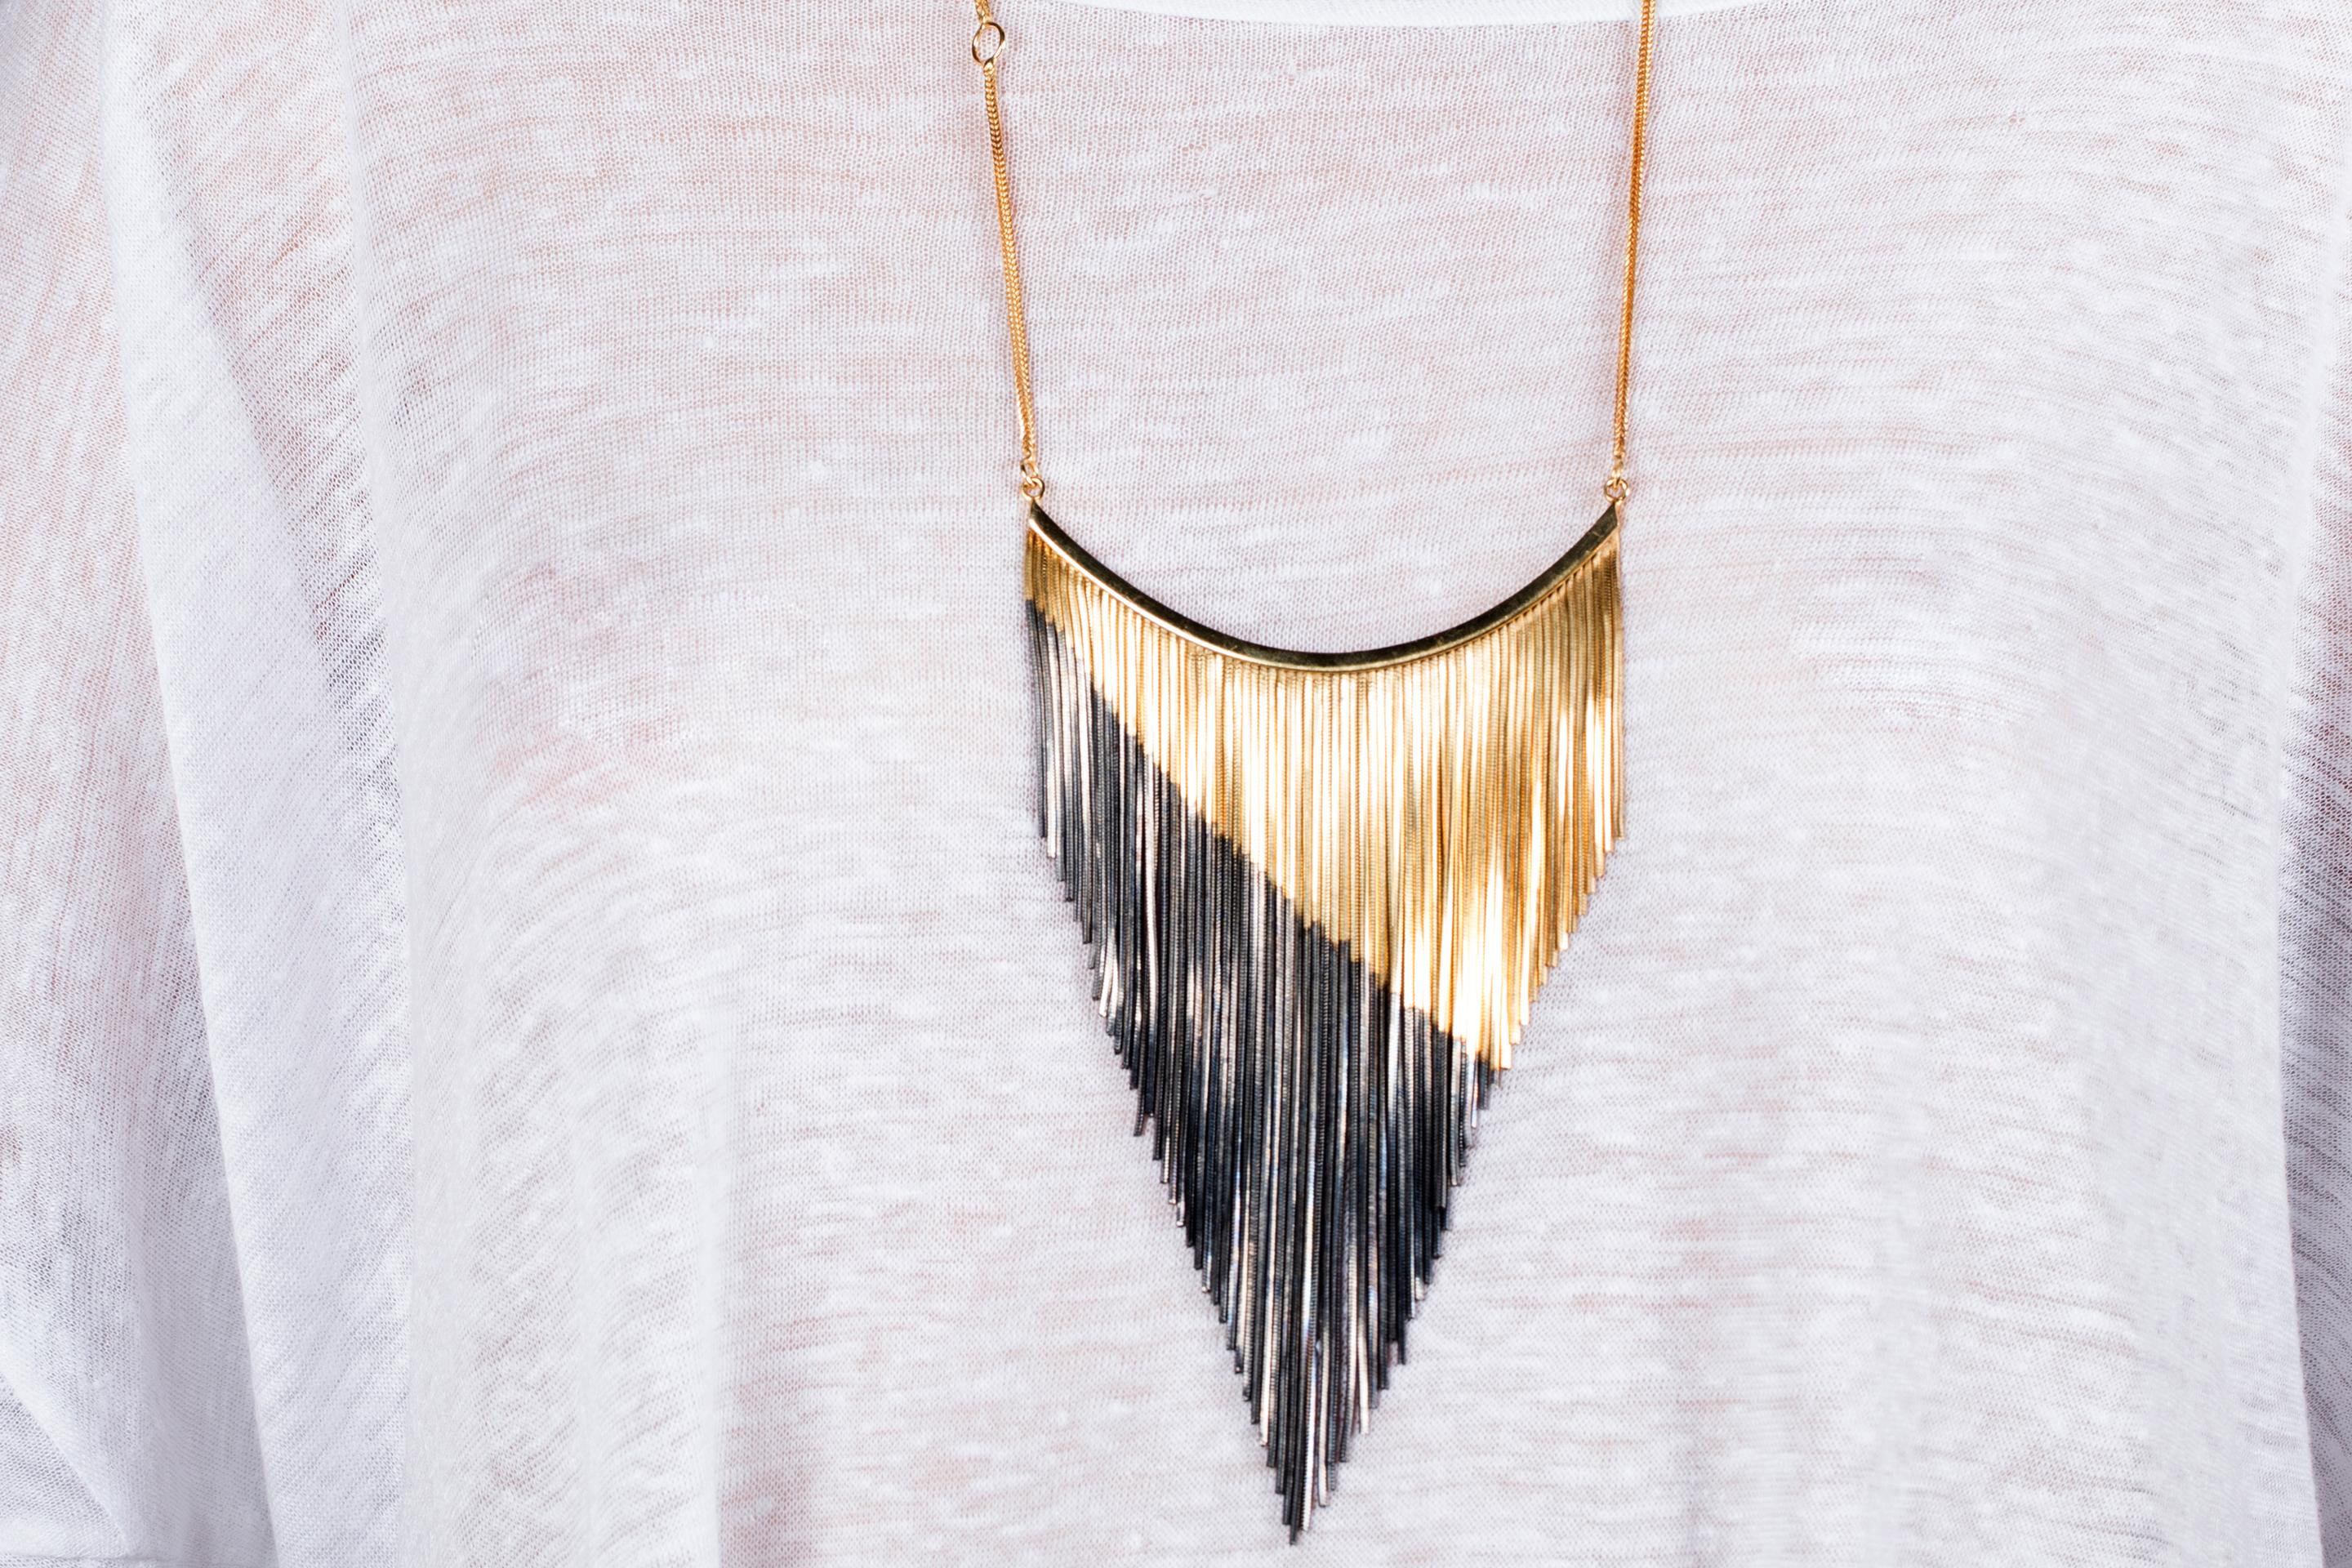 Wear timeless elegance through this bib necklace from Iosselliani. Beautifully designed with a diagonal cut cascade of fringes, this necklace features the brand's iconic two tones color combination of 18 carat gold and a darker shade of